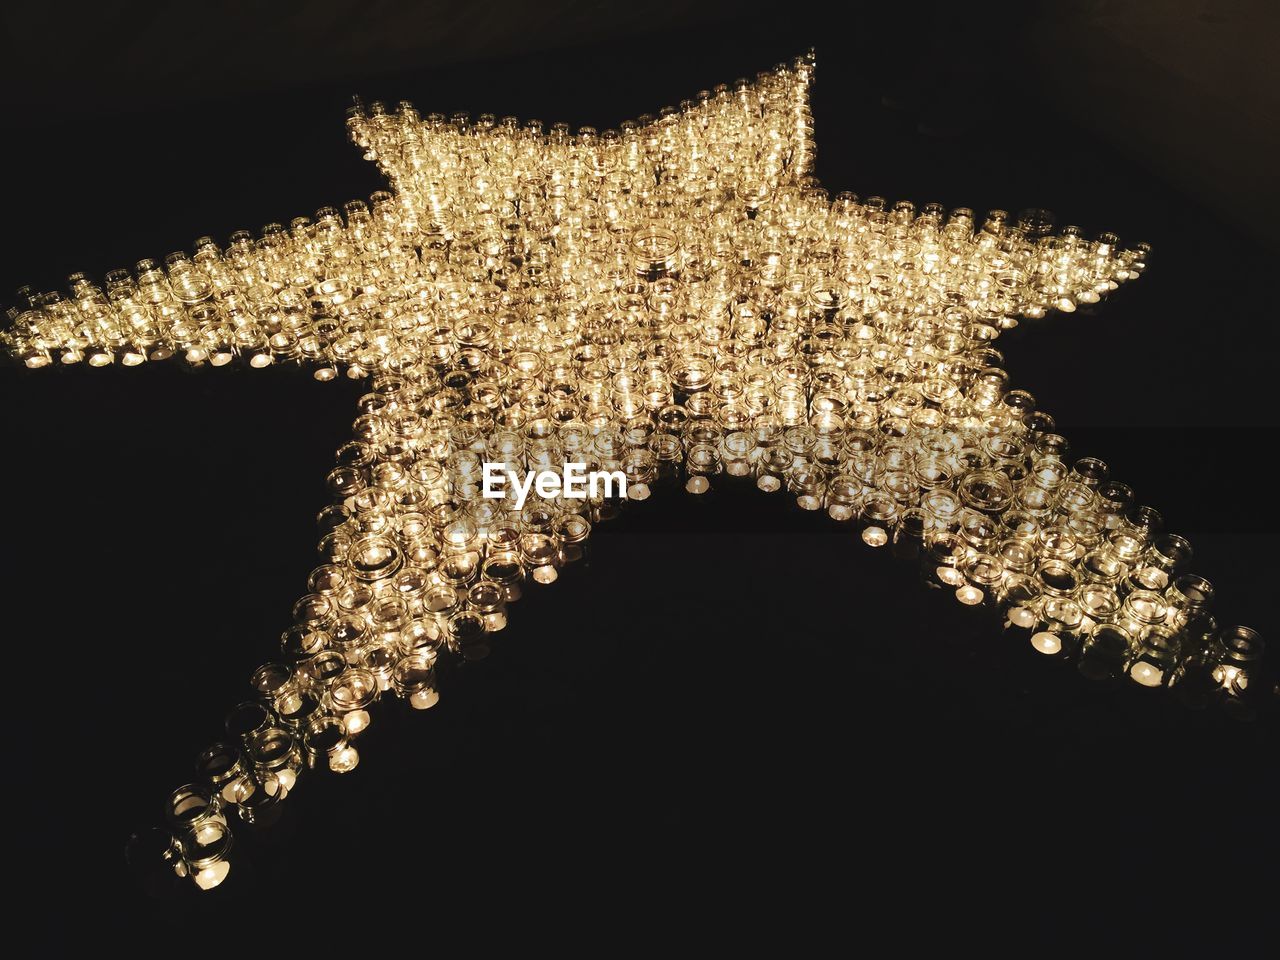 High angle view of illuminated tea lights in star shape over black background